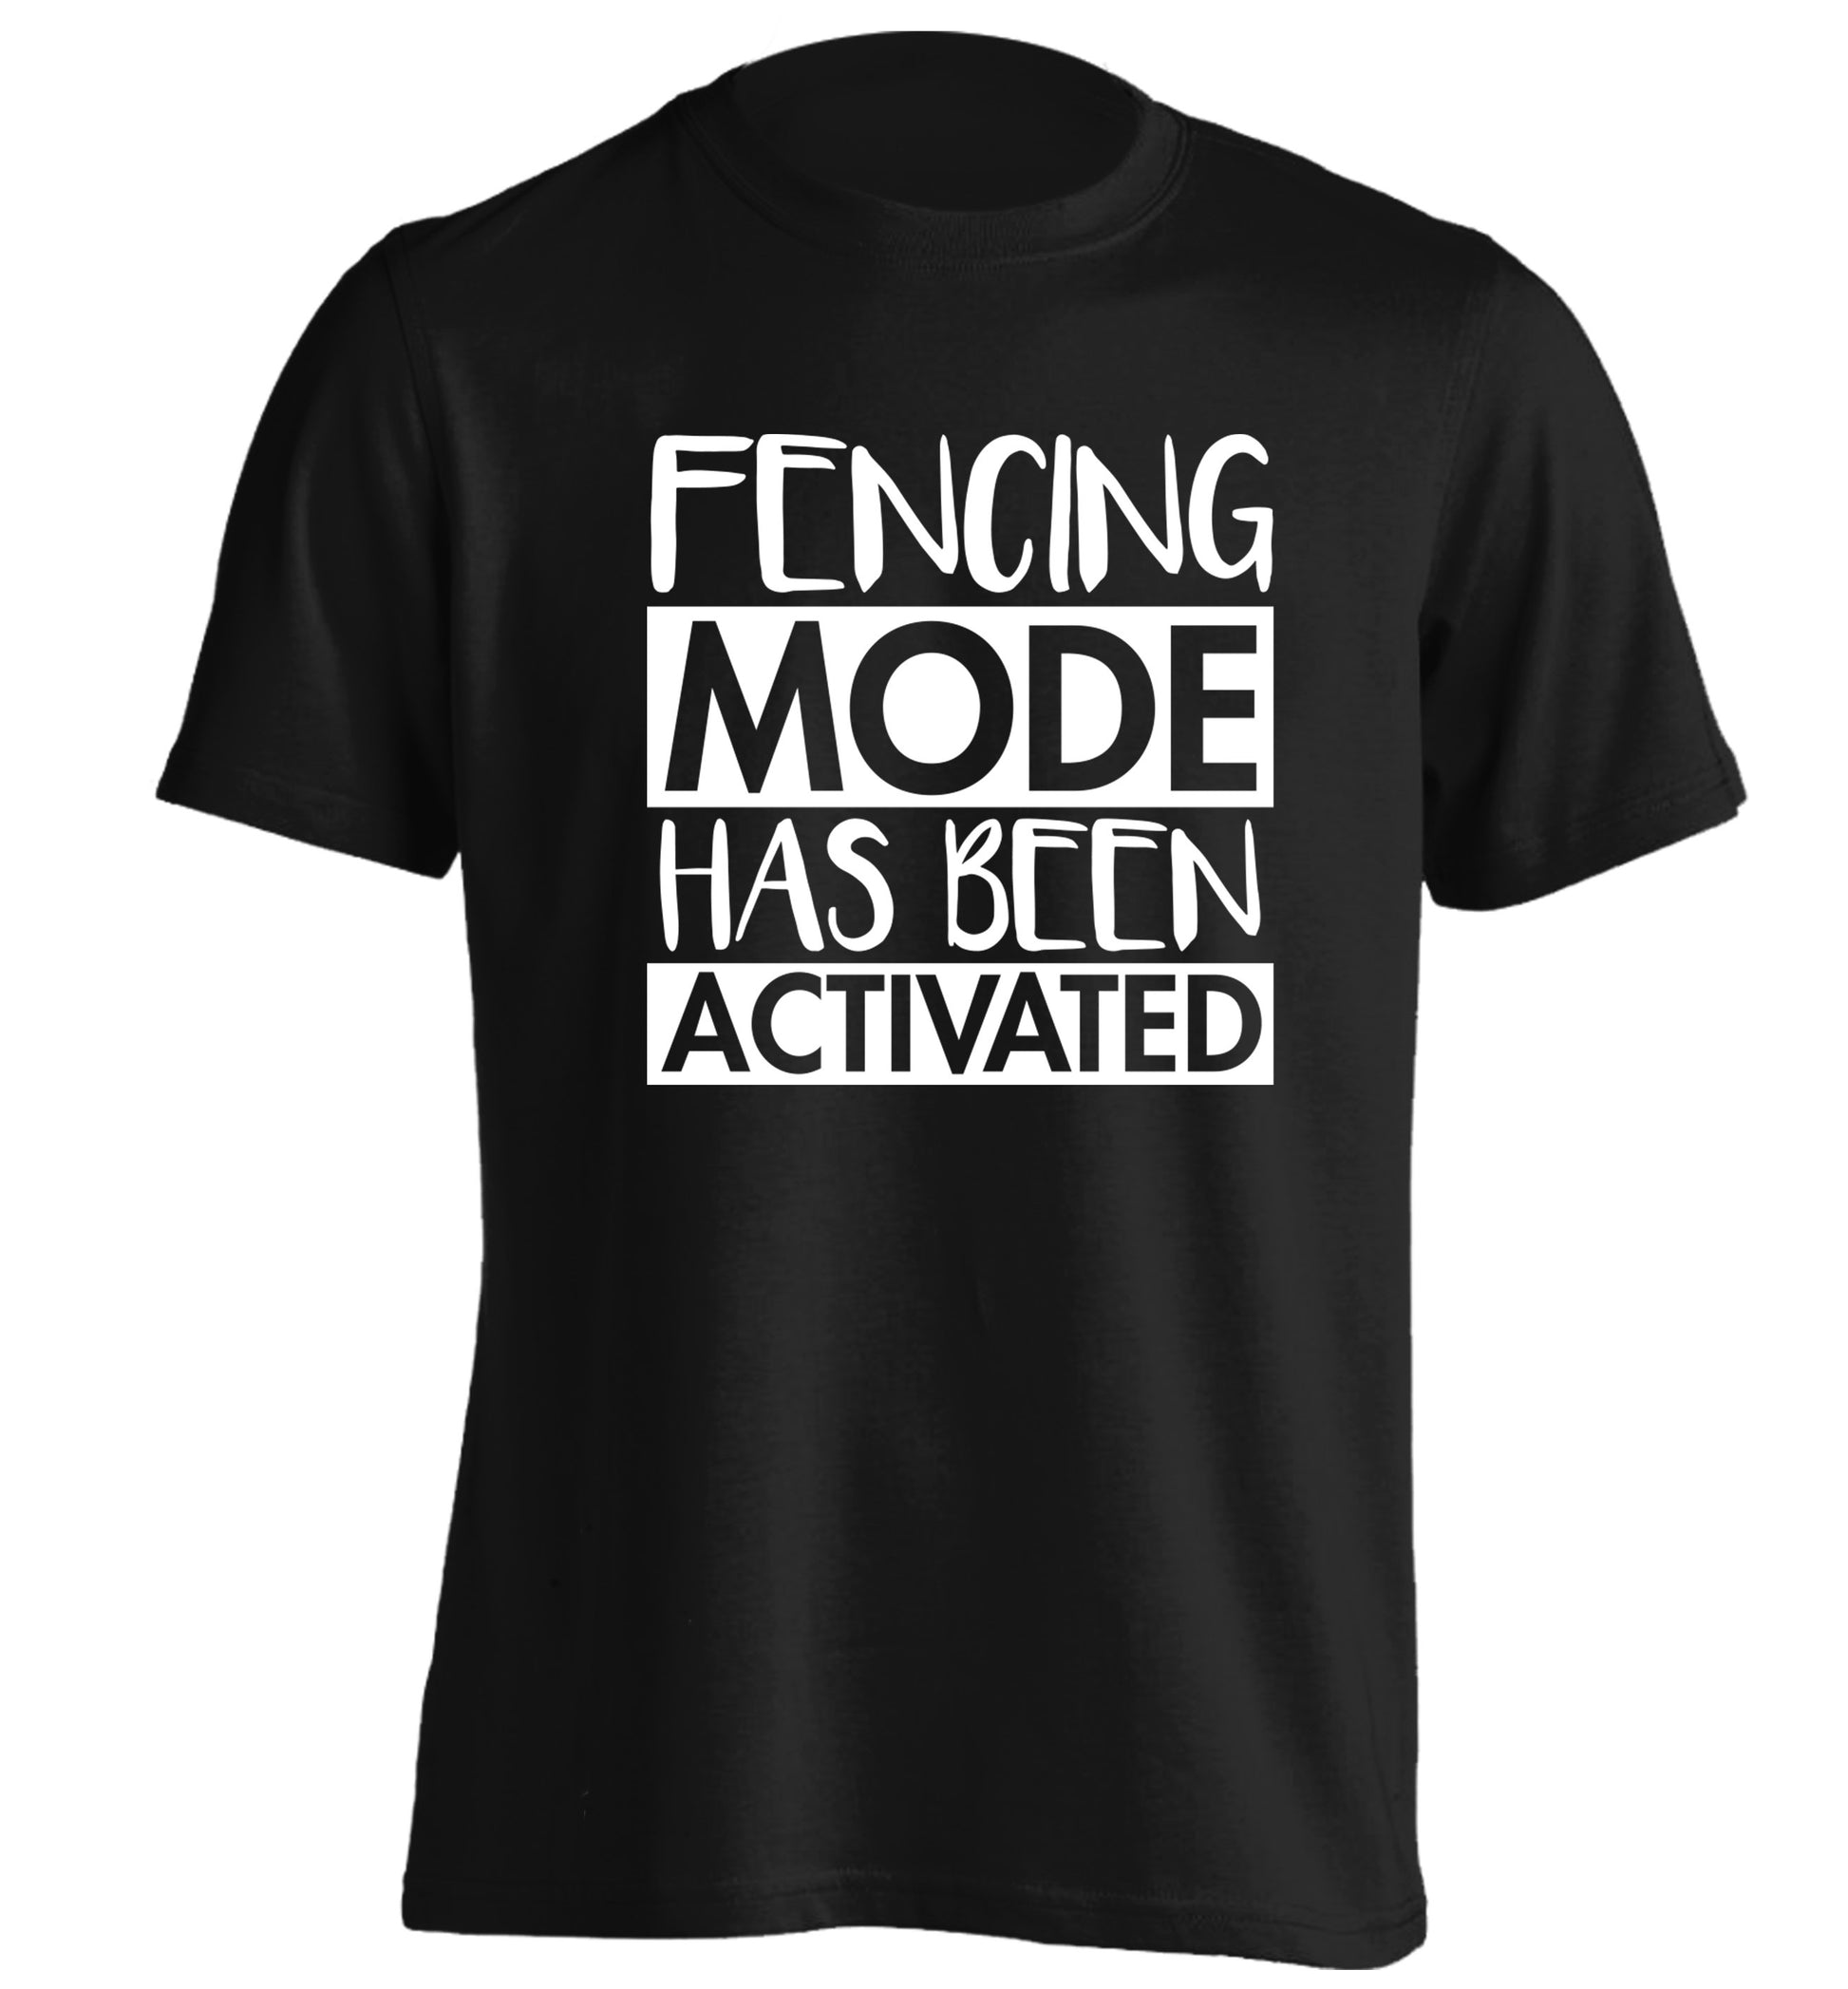 Fencing mode activated adults unisex black Tshirt 2XL